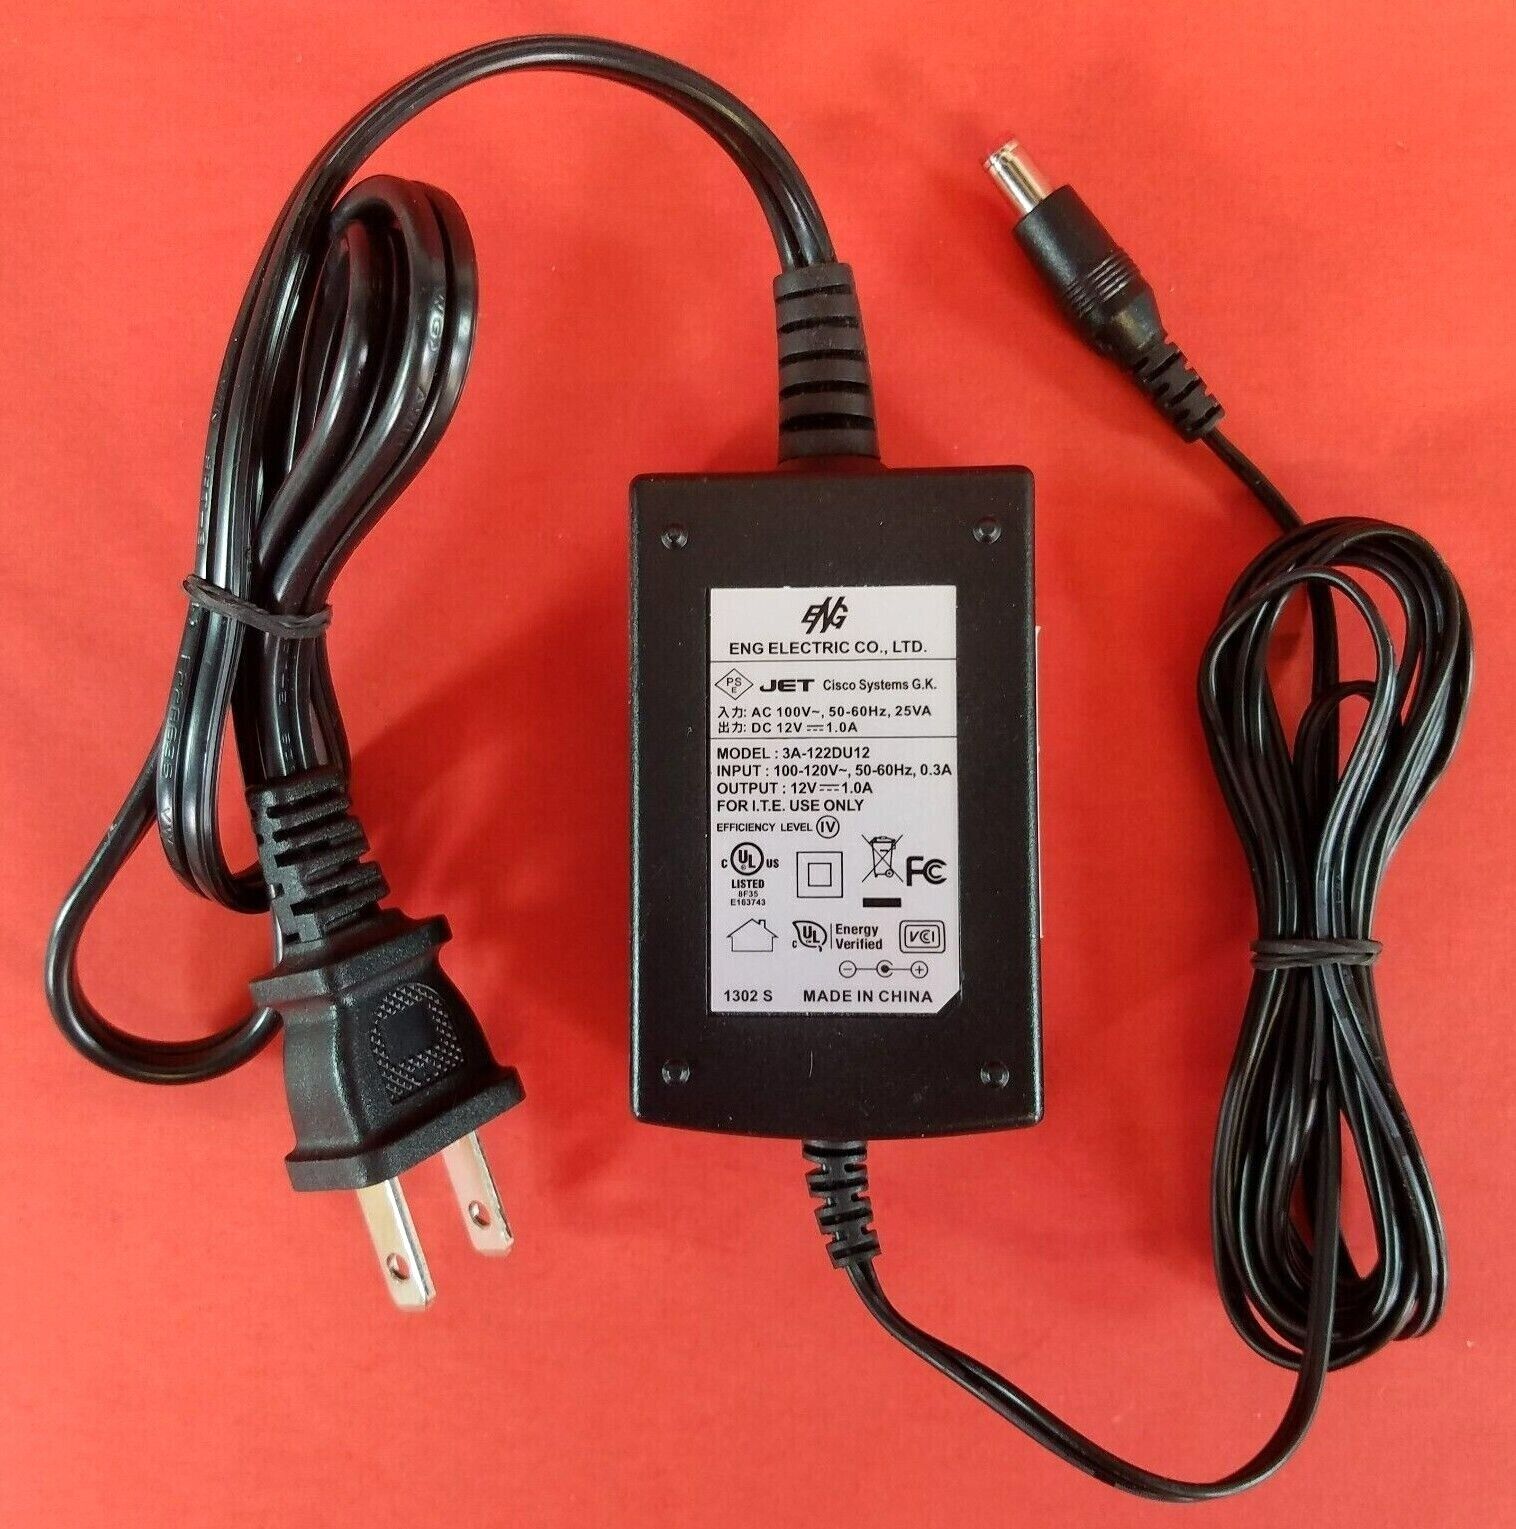 Genuine ENG Electric 3A-122DU12 Power Supply Adaptor 12V - 1A OEM AC/DC Adapter Type: AC/DC Adapte